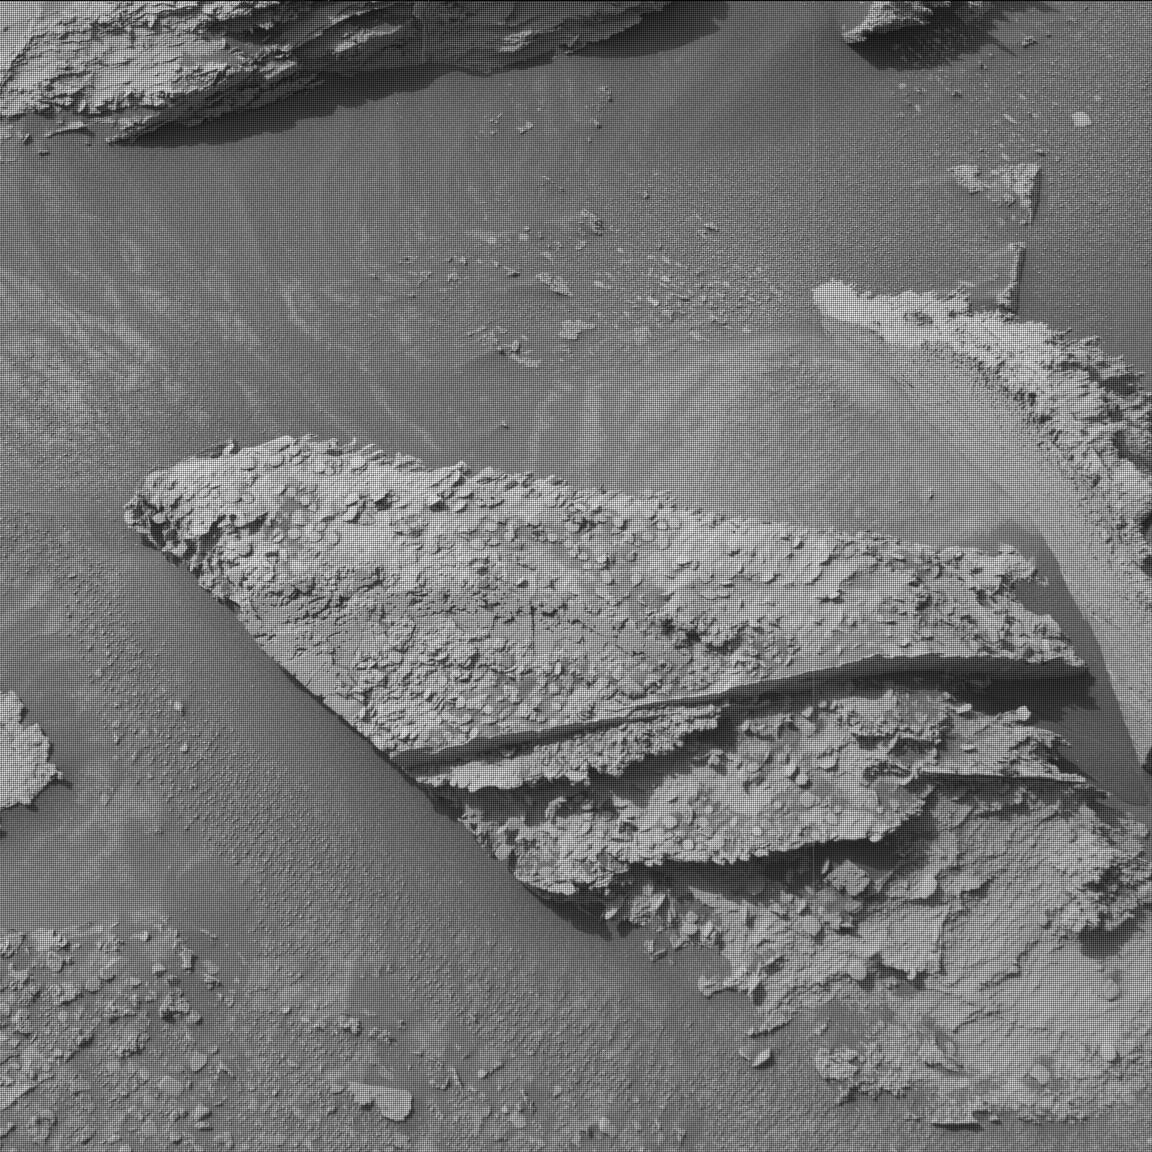 This image shows the target "Murupu" and was taken by the Curiosity rover on Sol 3495.